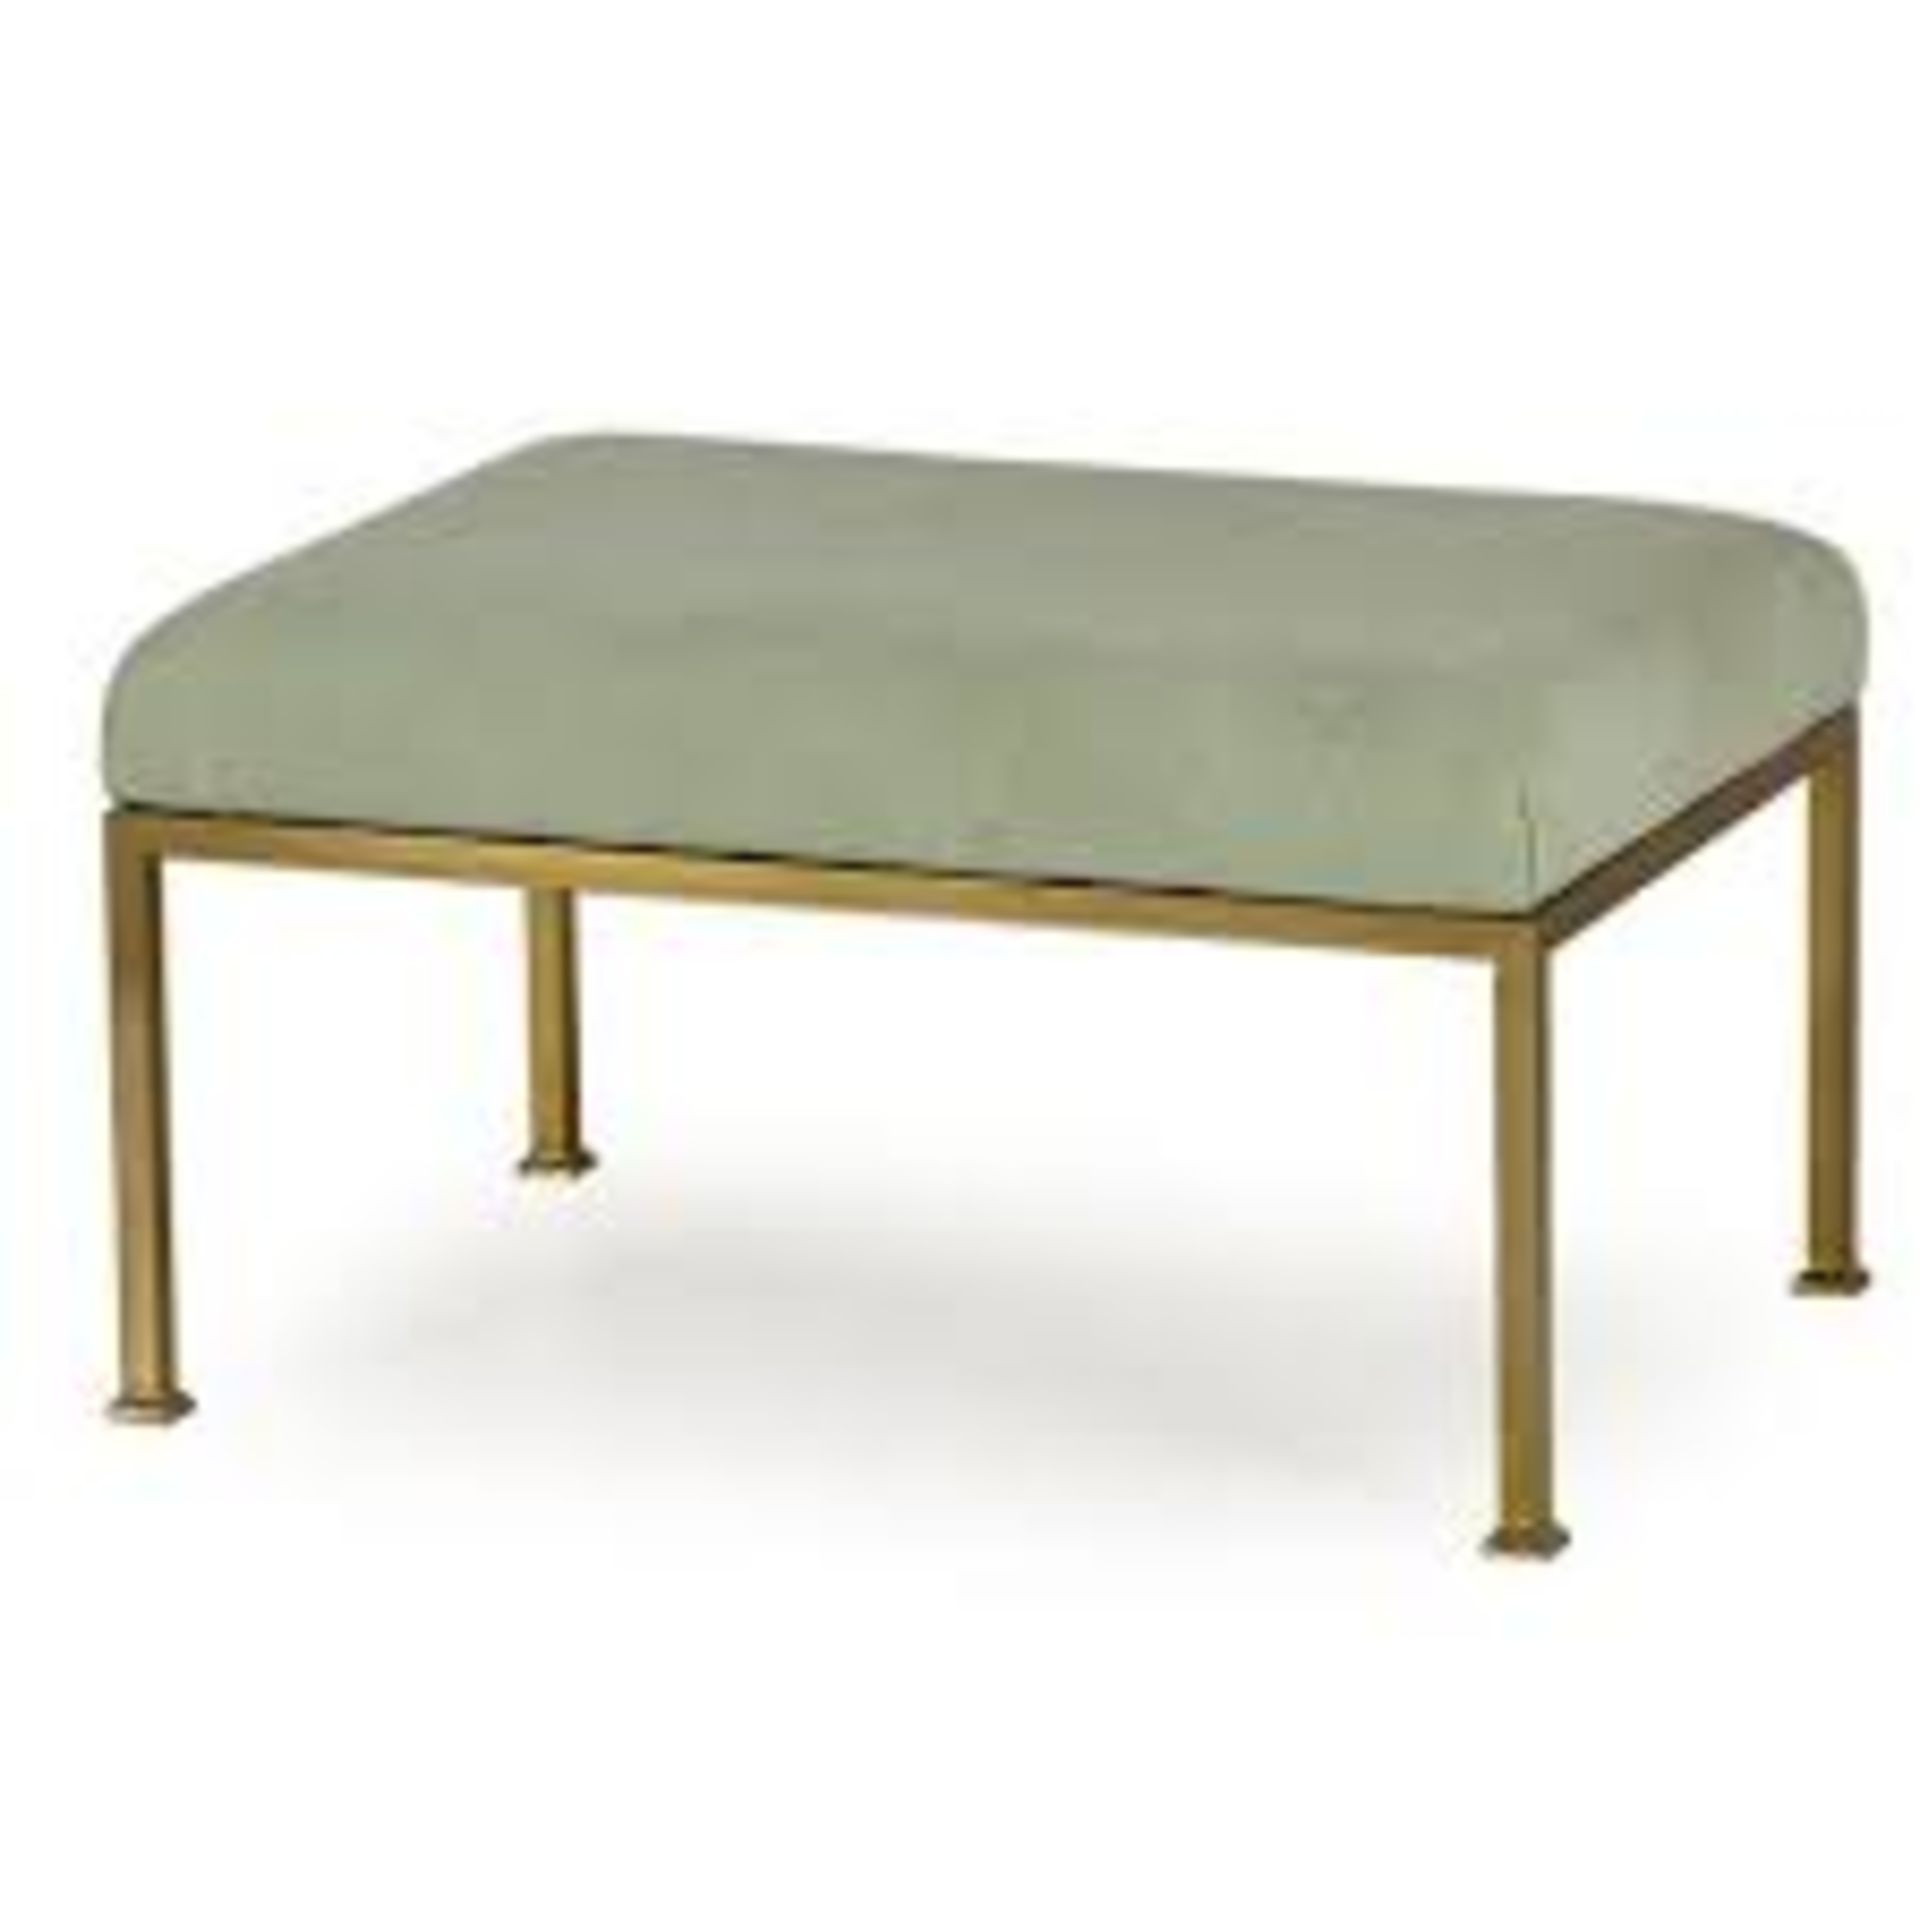 Mighty Nina Celery Ottoman A Versatile Ottoman With A Satin Brass Base And Plush Upholstery 71 x - Image 2 of 2